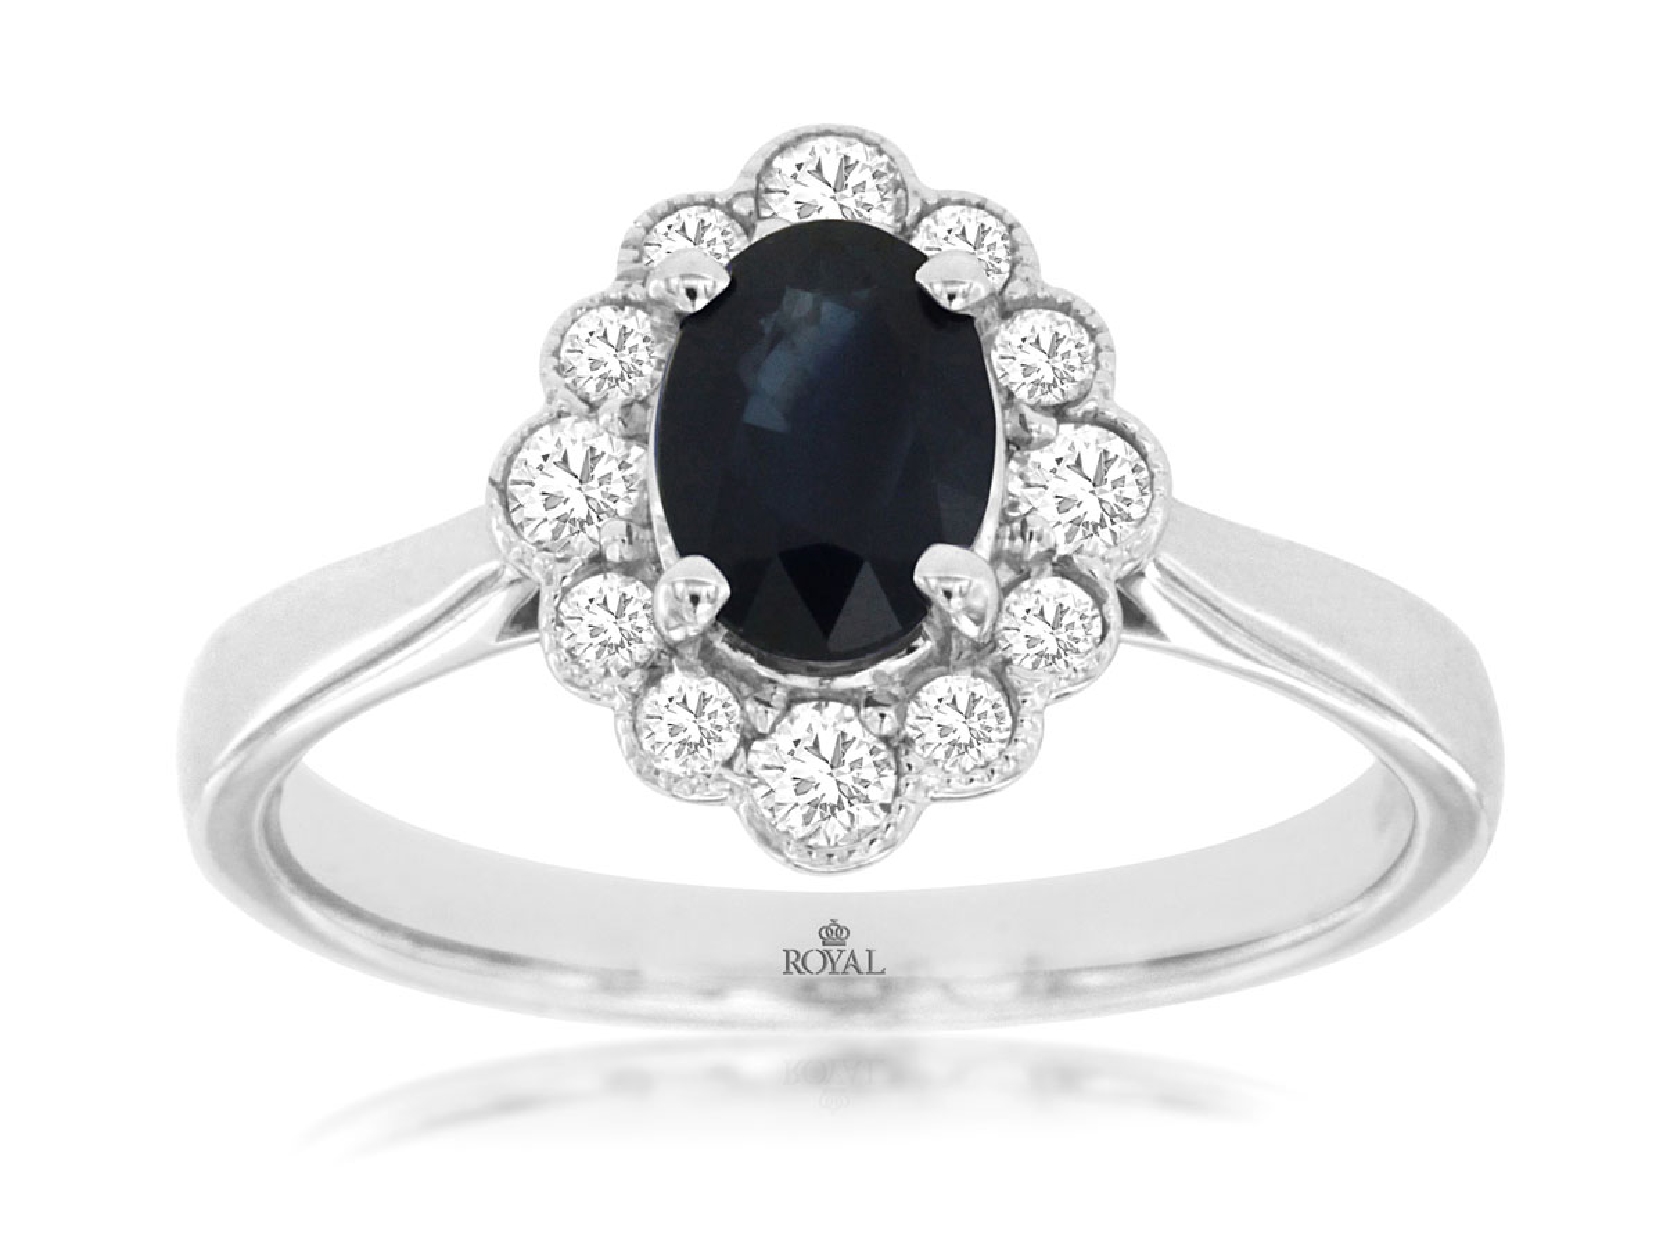 14K White Gold Sapphire Ring with Floral Diamond Halo Size 7